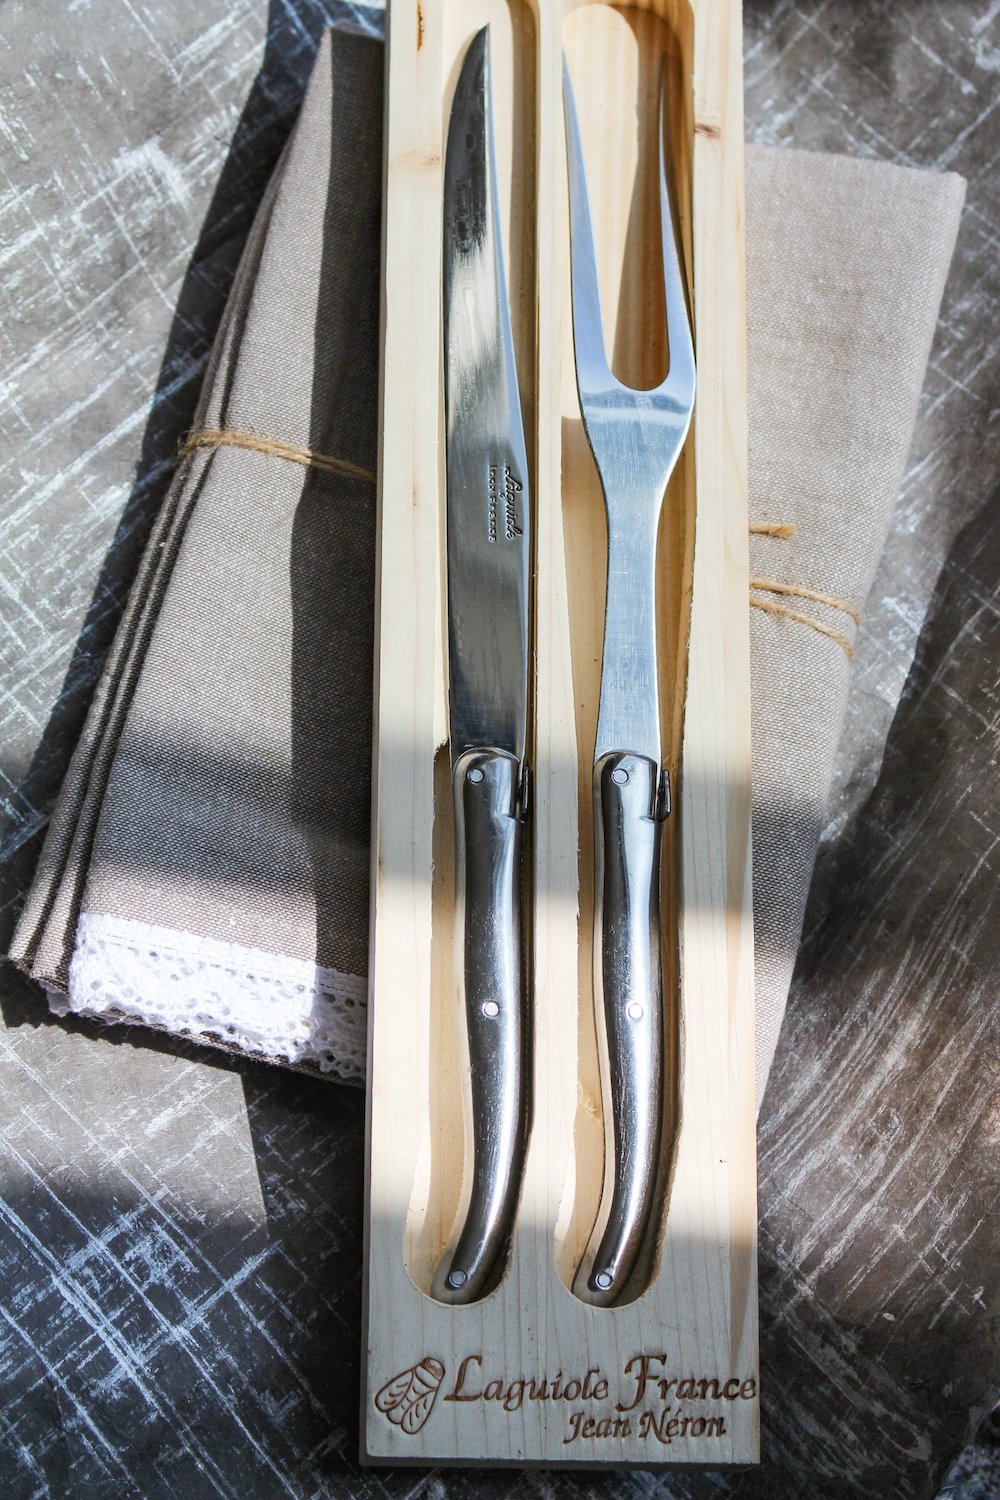 Laguiole Platine Stainless Steel Carving Set in Wood Box